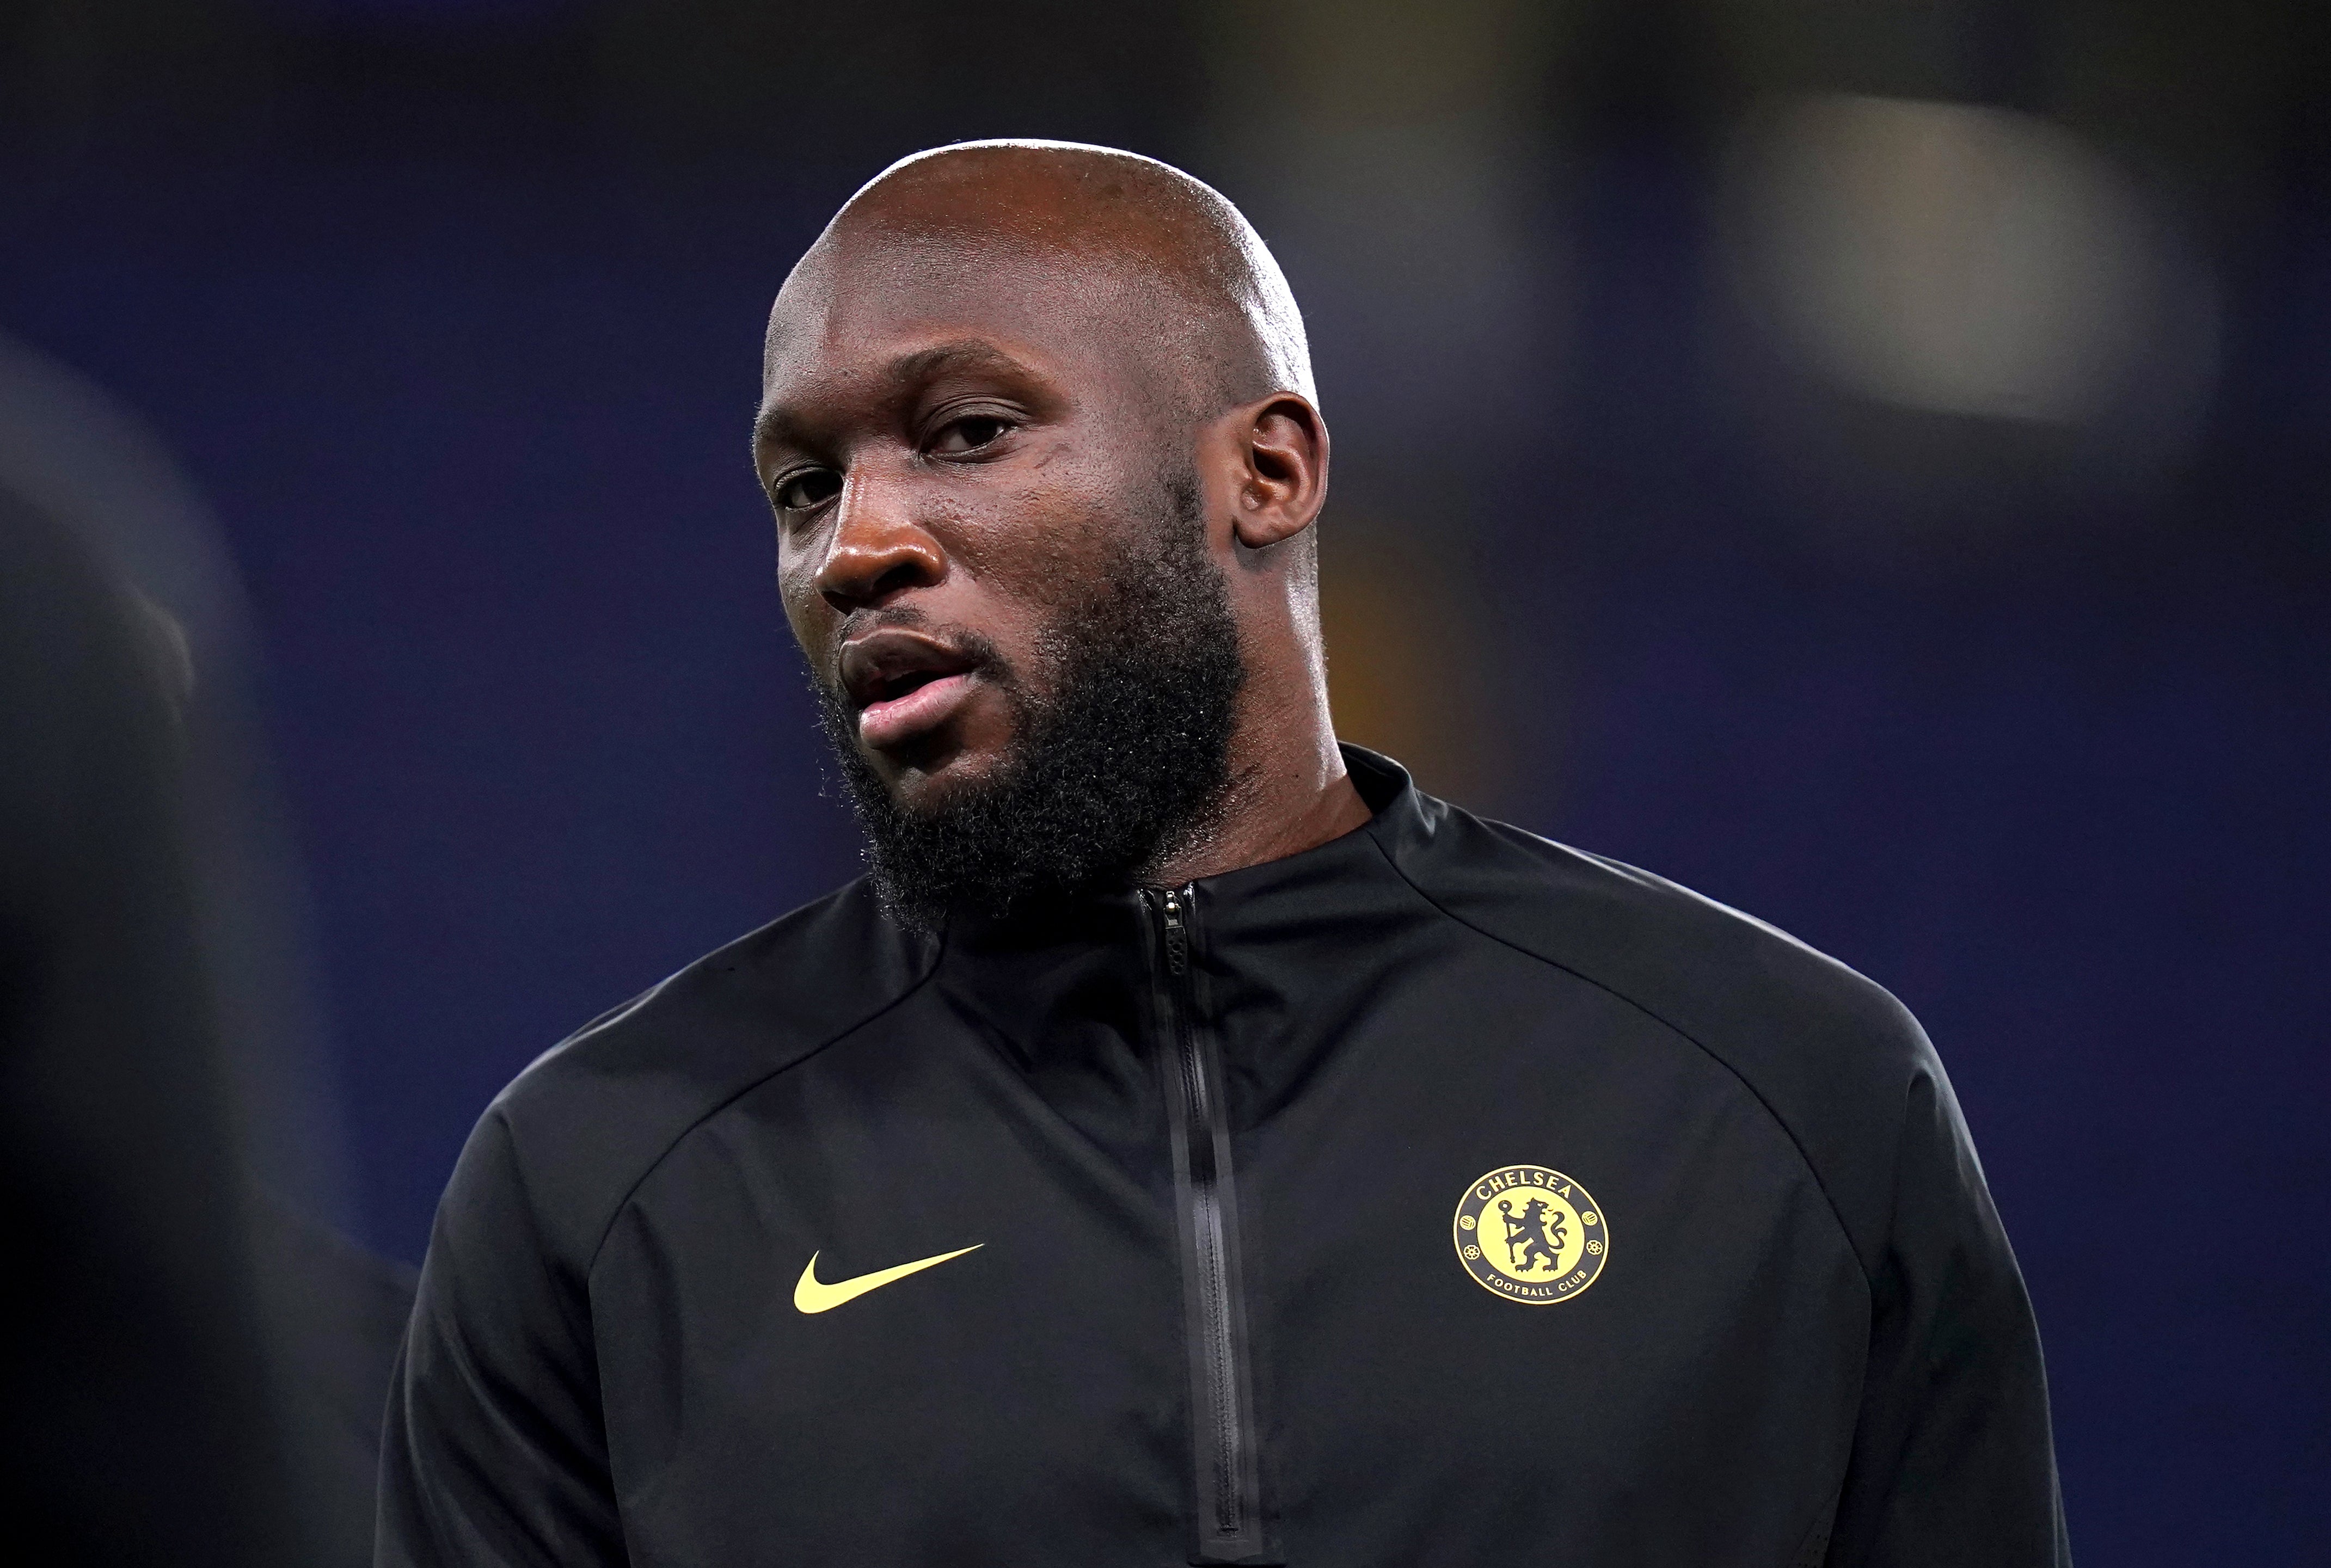 Romelu Lukaku, pictured, has apologised to Chelsea’s players (Adam Davy/PA)